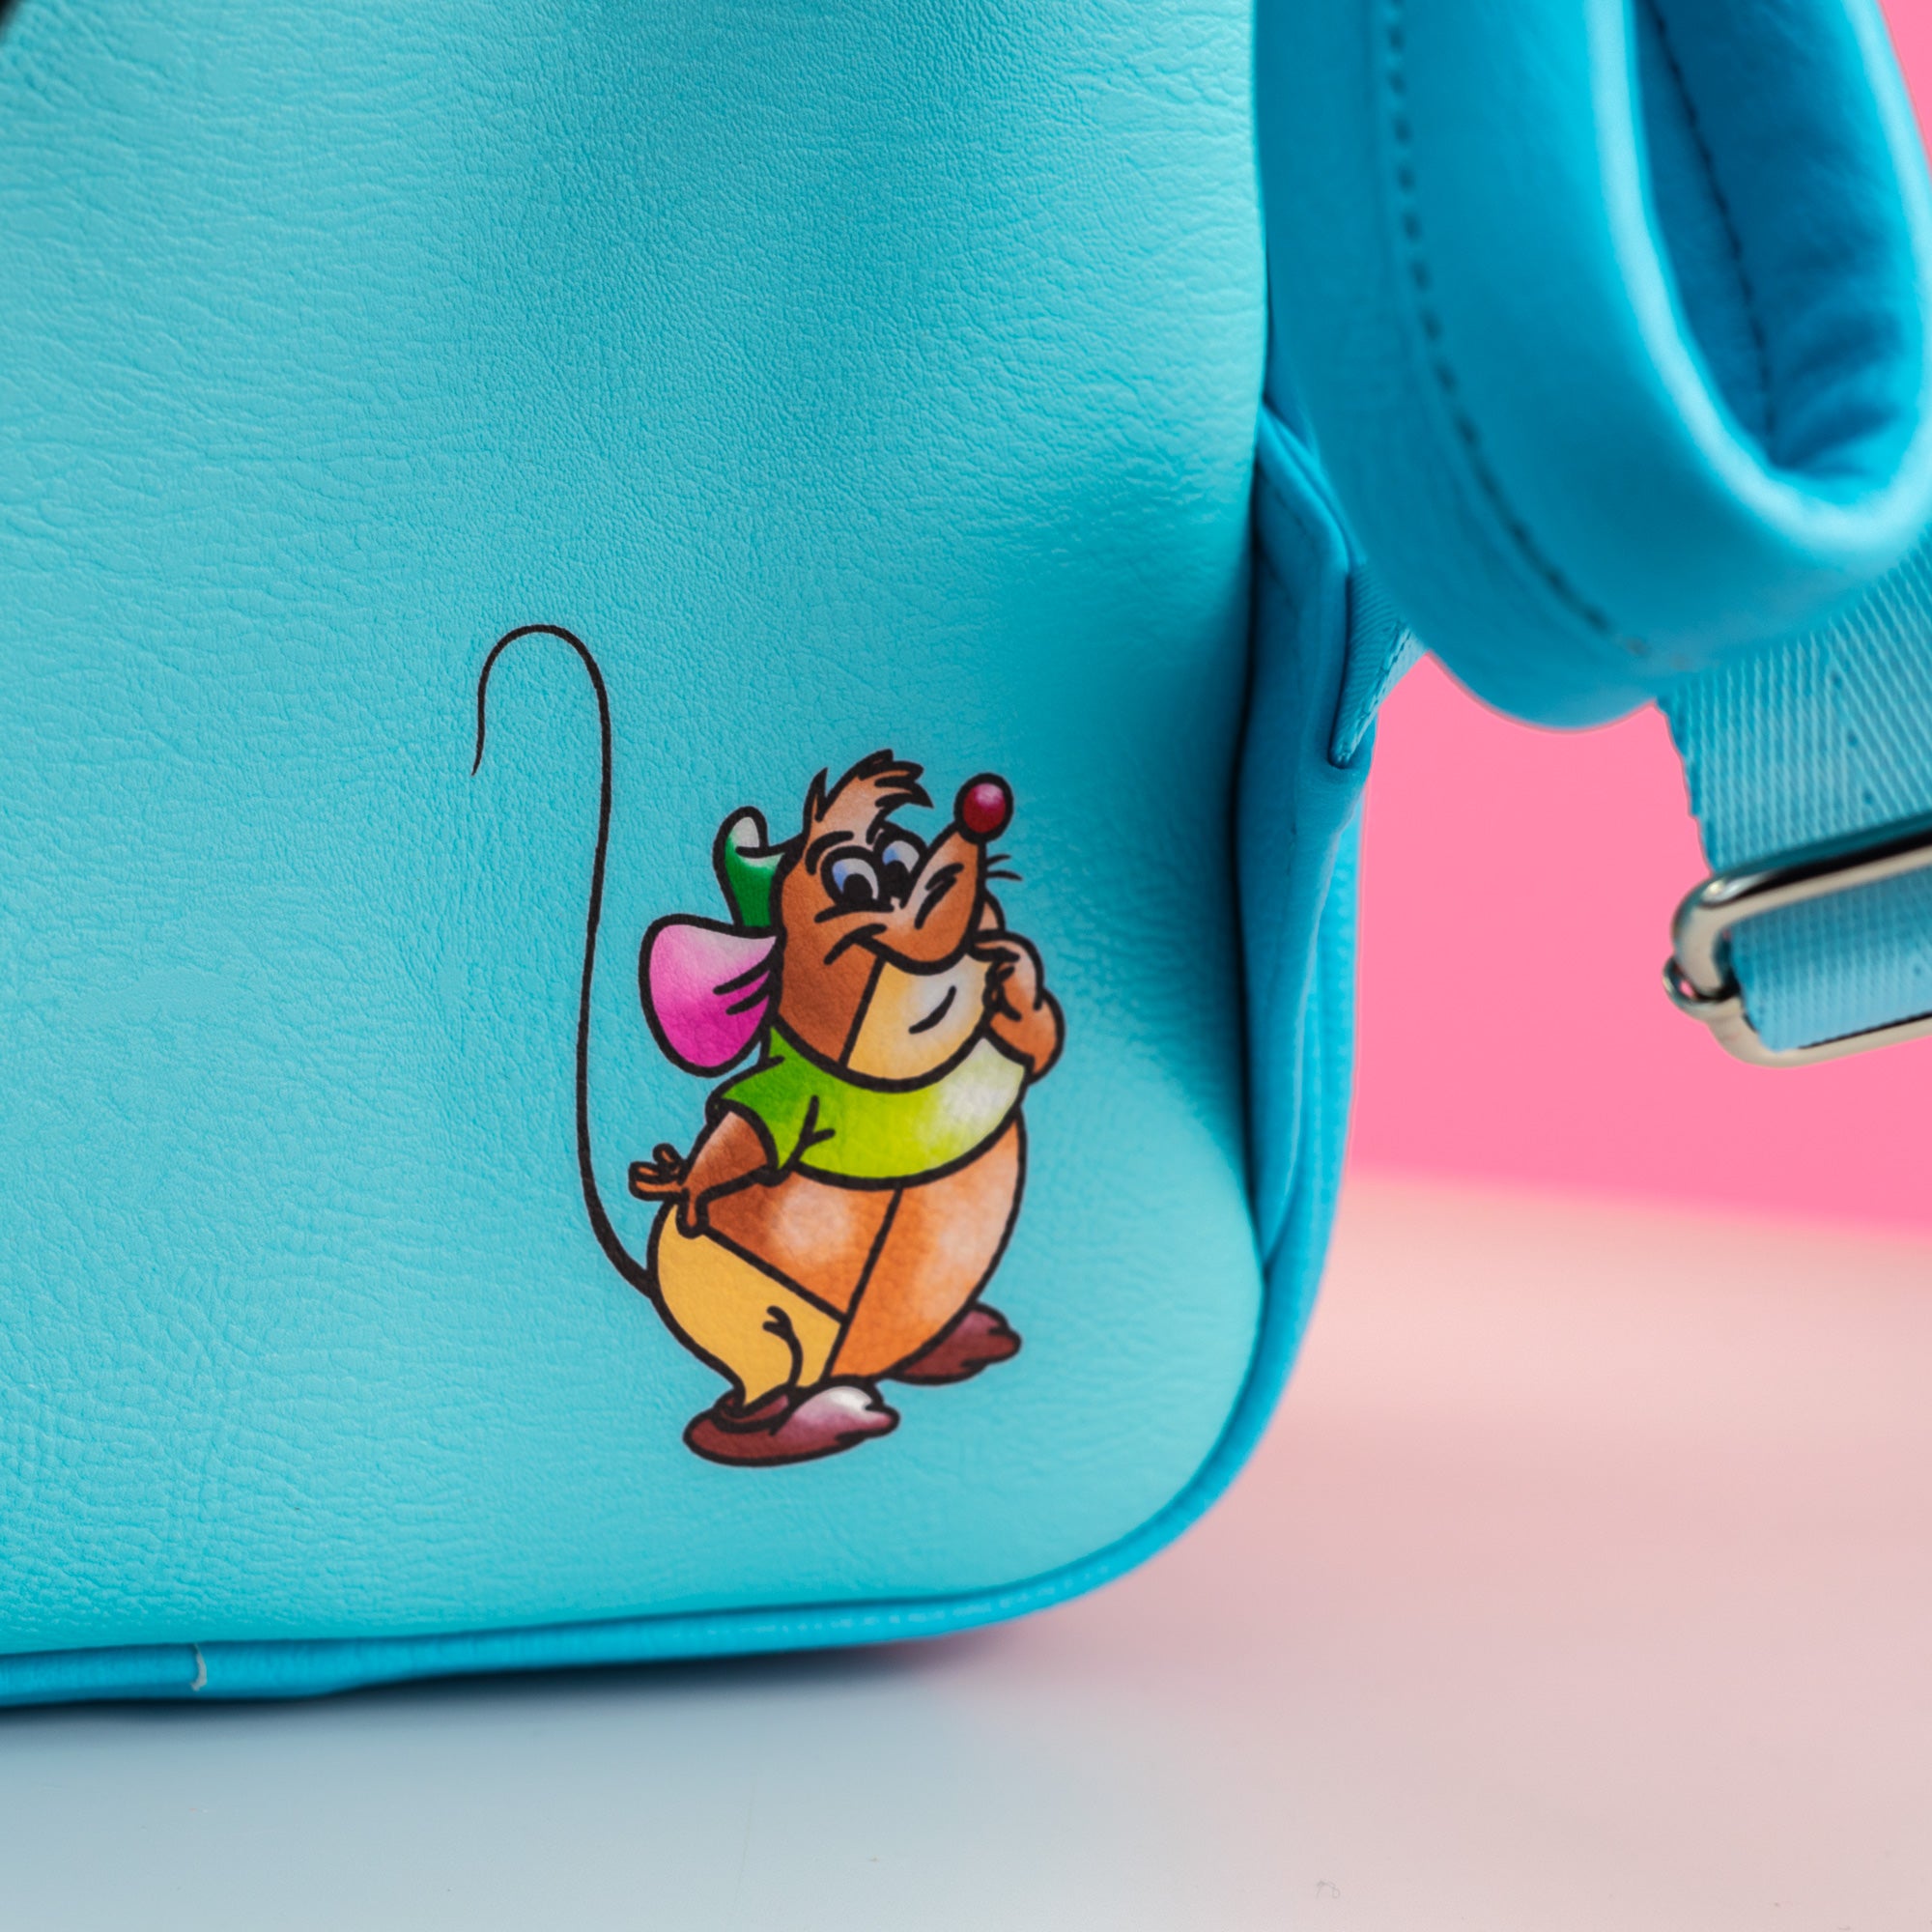 Loungefly x Disney Cinderella Stained Glass Mini Backpack